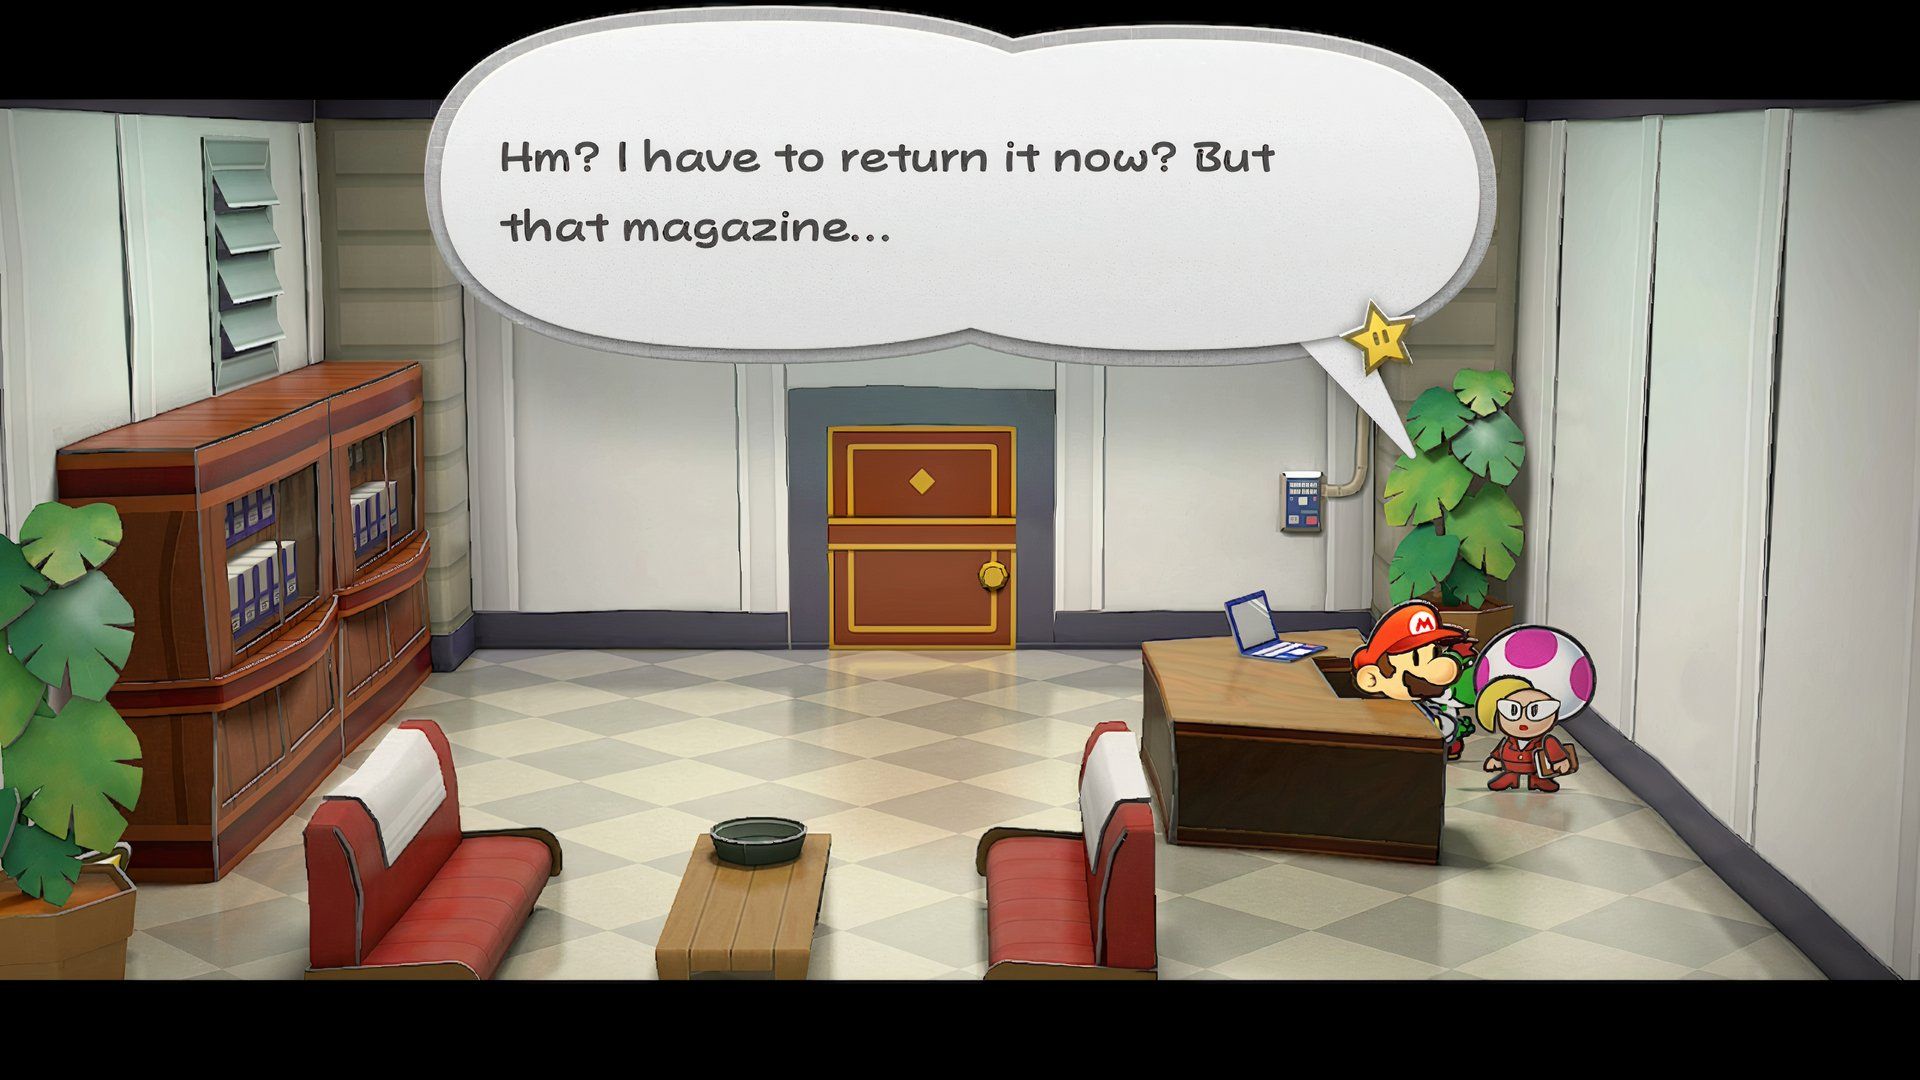 Paper Mario: The Thousand-Year Door - Trouble Center Toodles' Magazine with Jolene